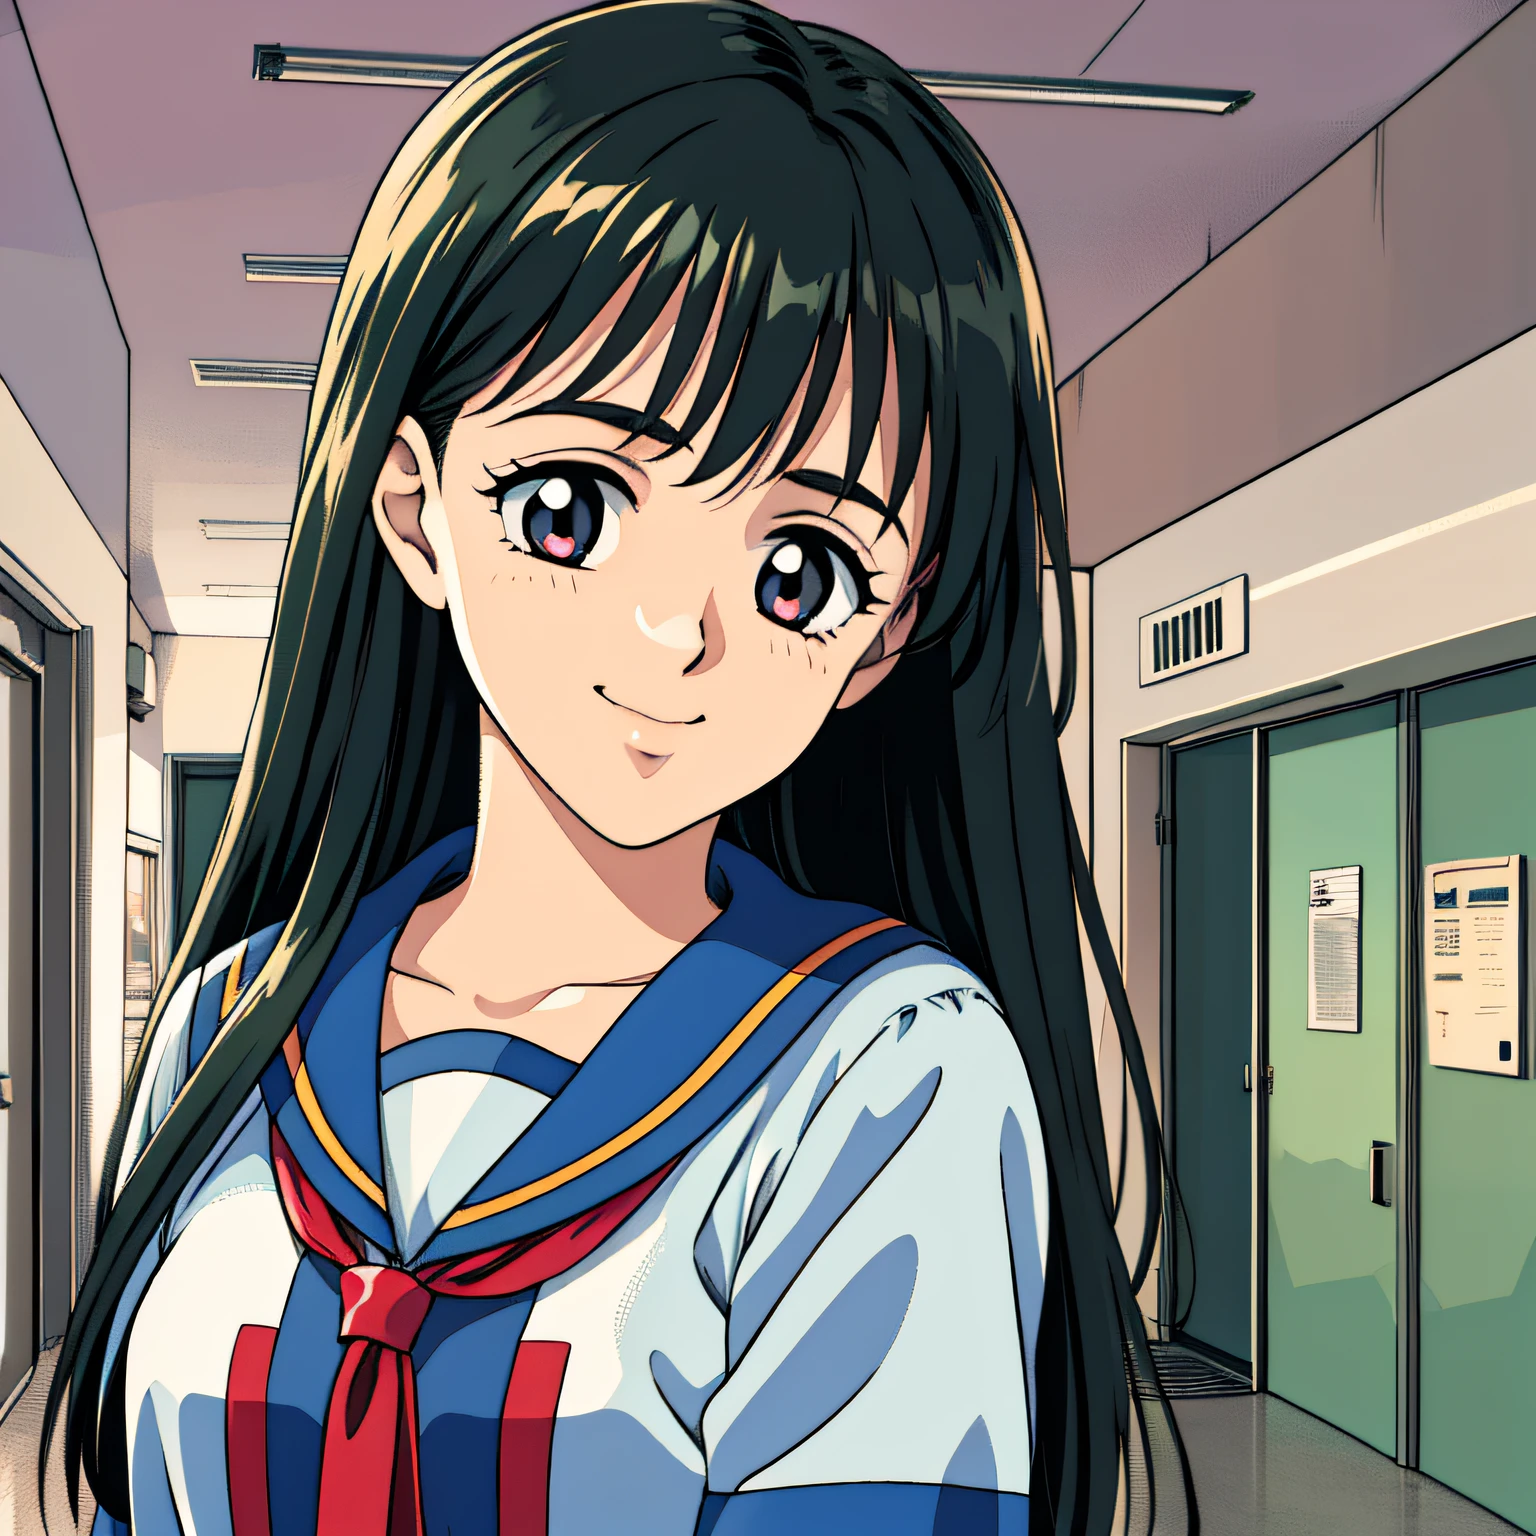 retro artstyle、dark-haired、school uniformss、Schools、school hallway、Slouched、looking at the viewers、A smile、school uniformss、One girl、Ecchi anime style